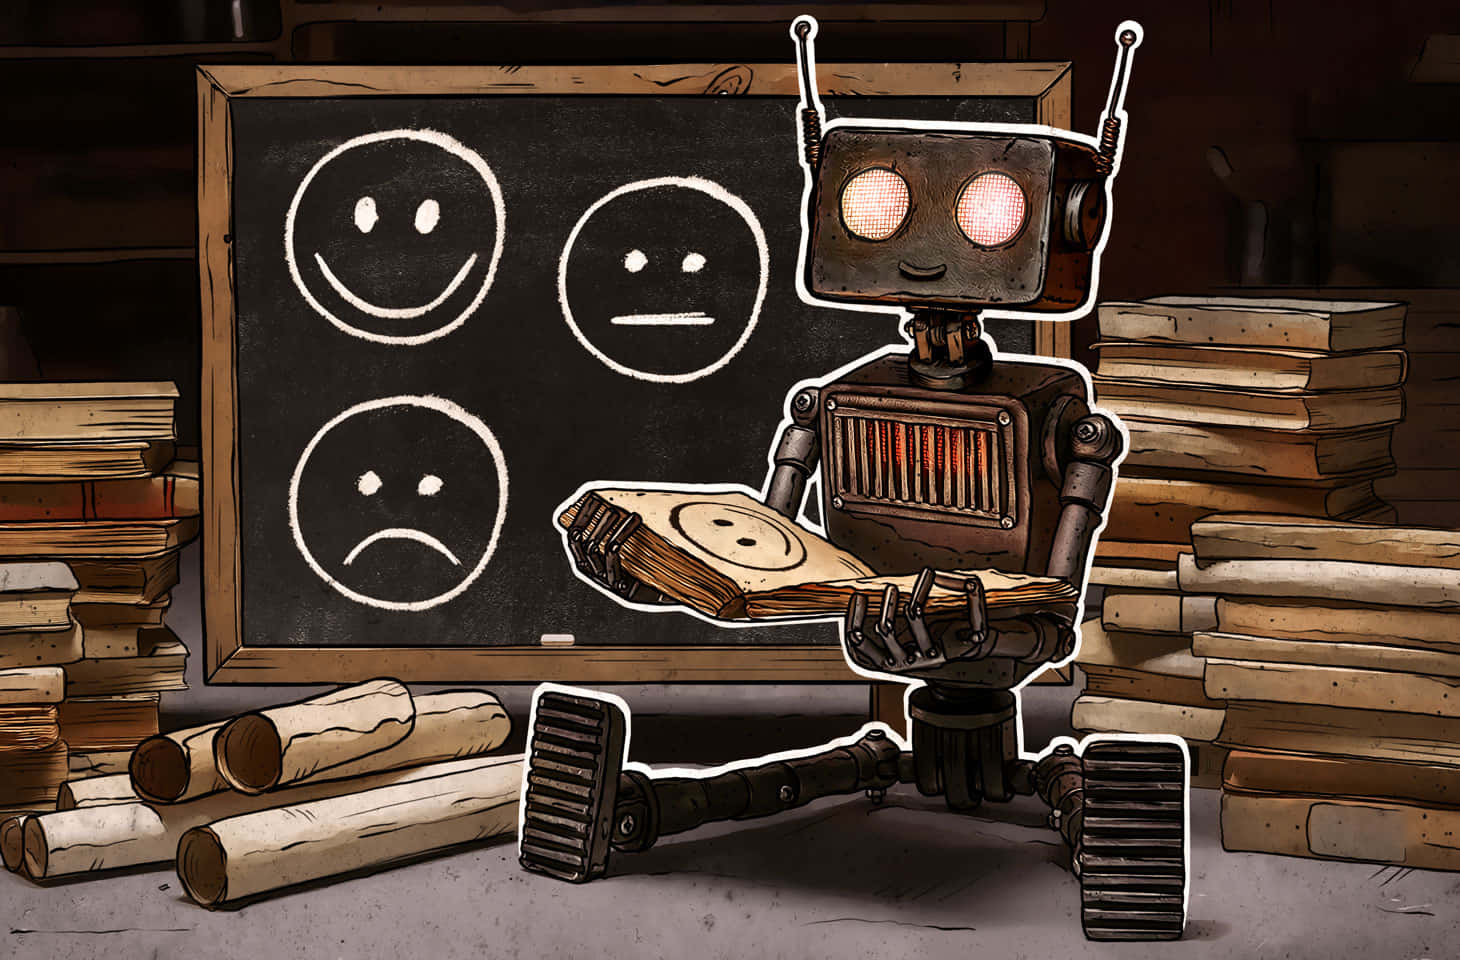 A Robot Sitting In Front Of A Blackboard With A Smiley Face